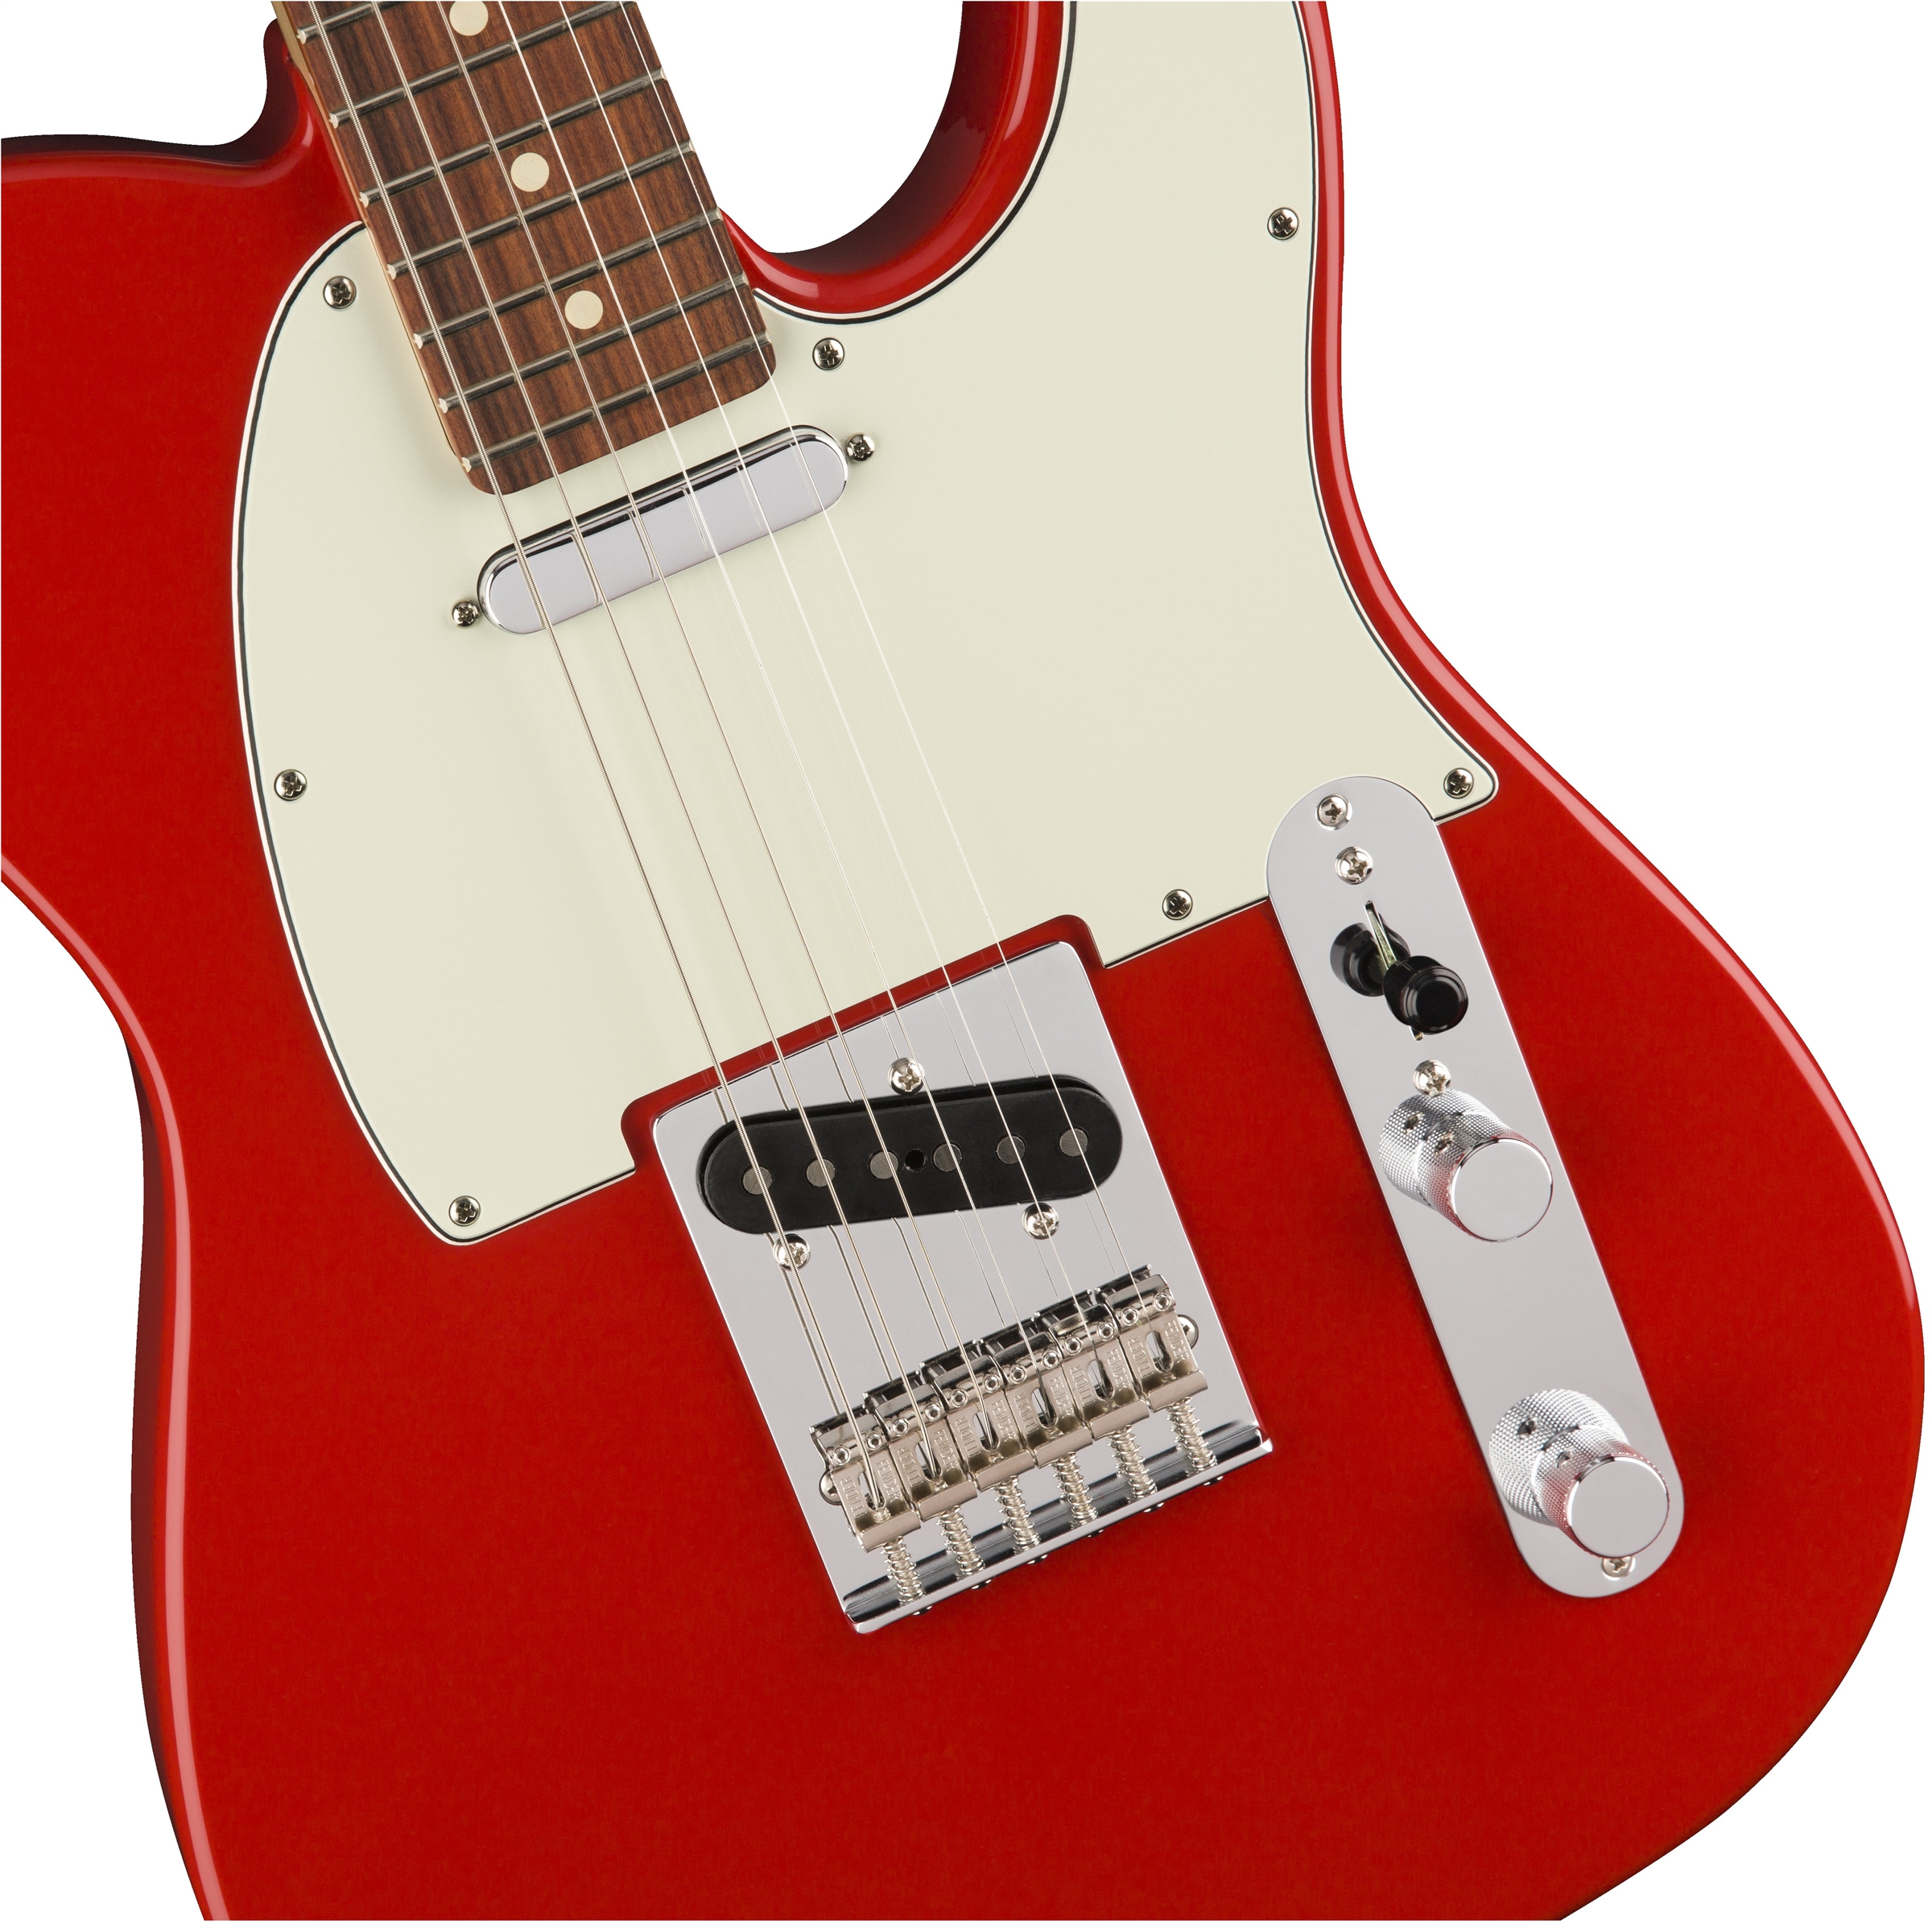 Fender Tele Player Mex Ss Pf - Sonic Red - Tel shape electric guitar - Variation 2